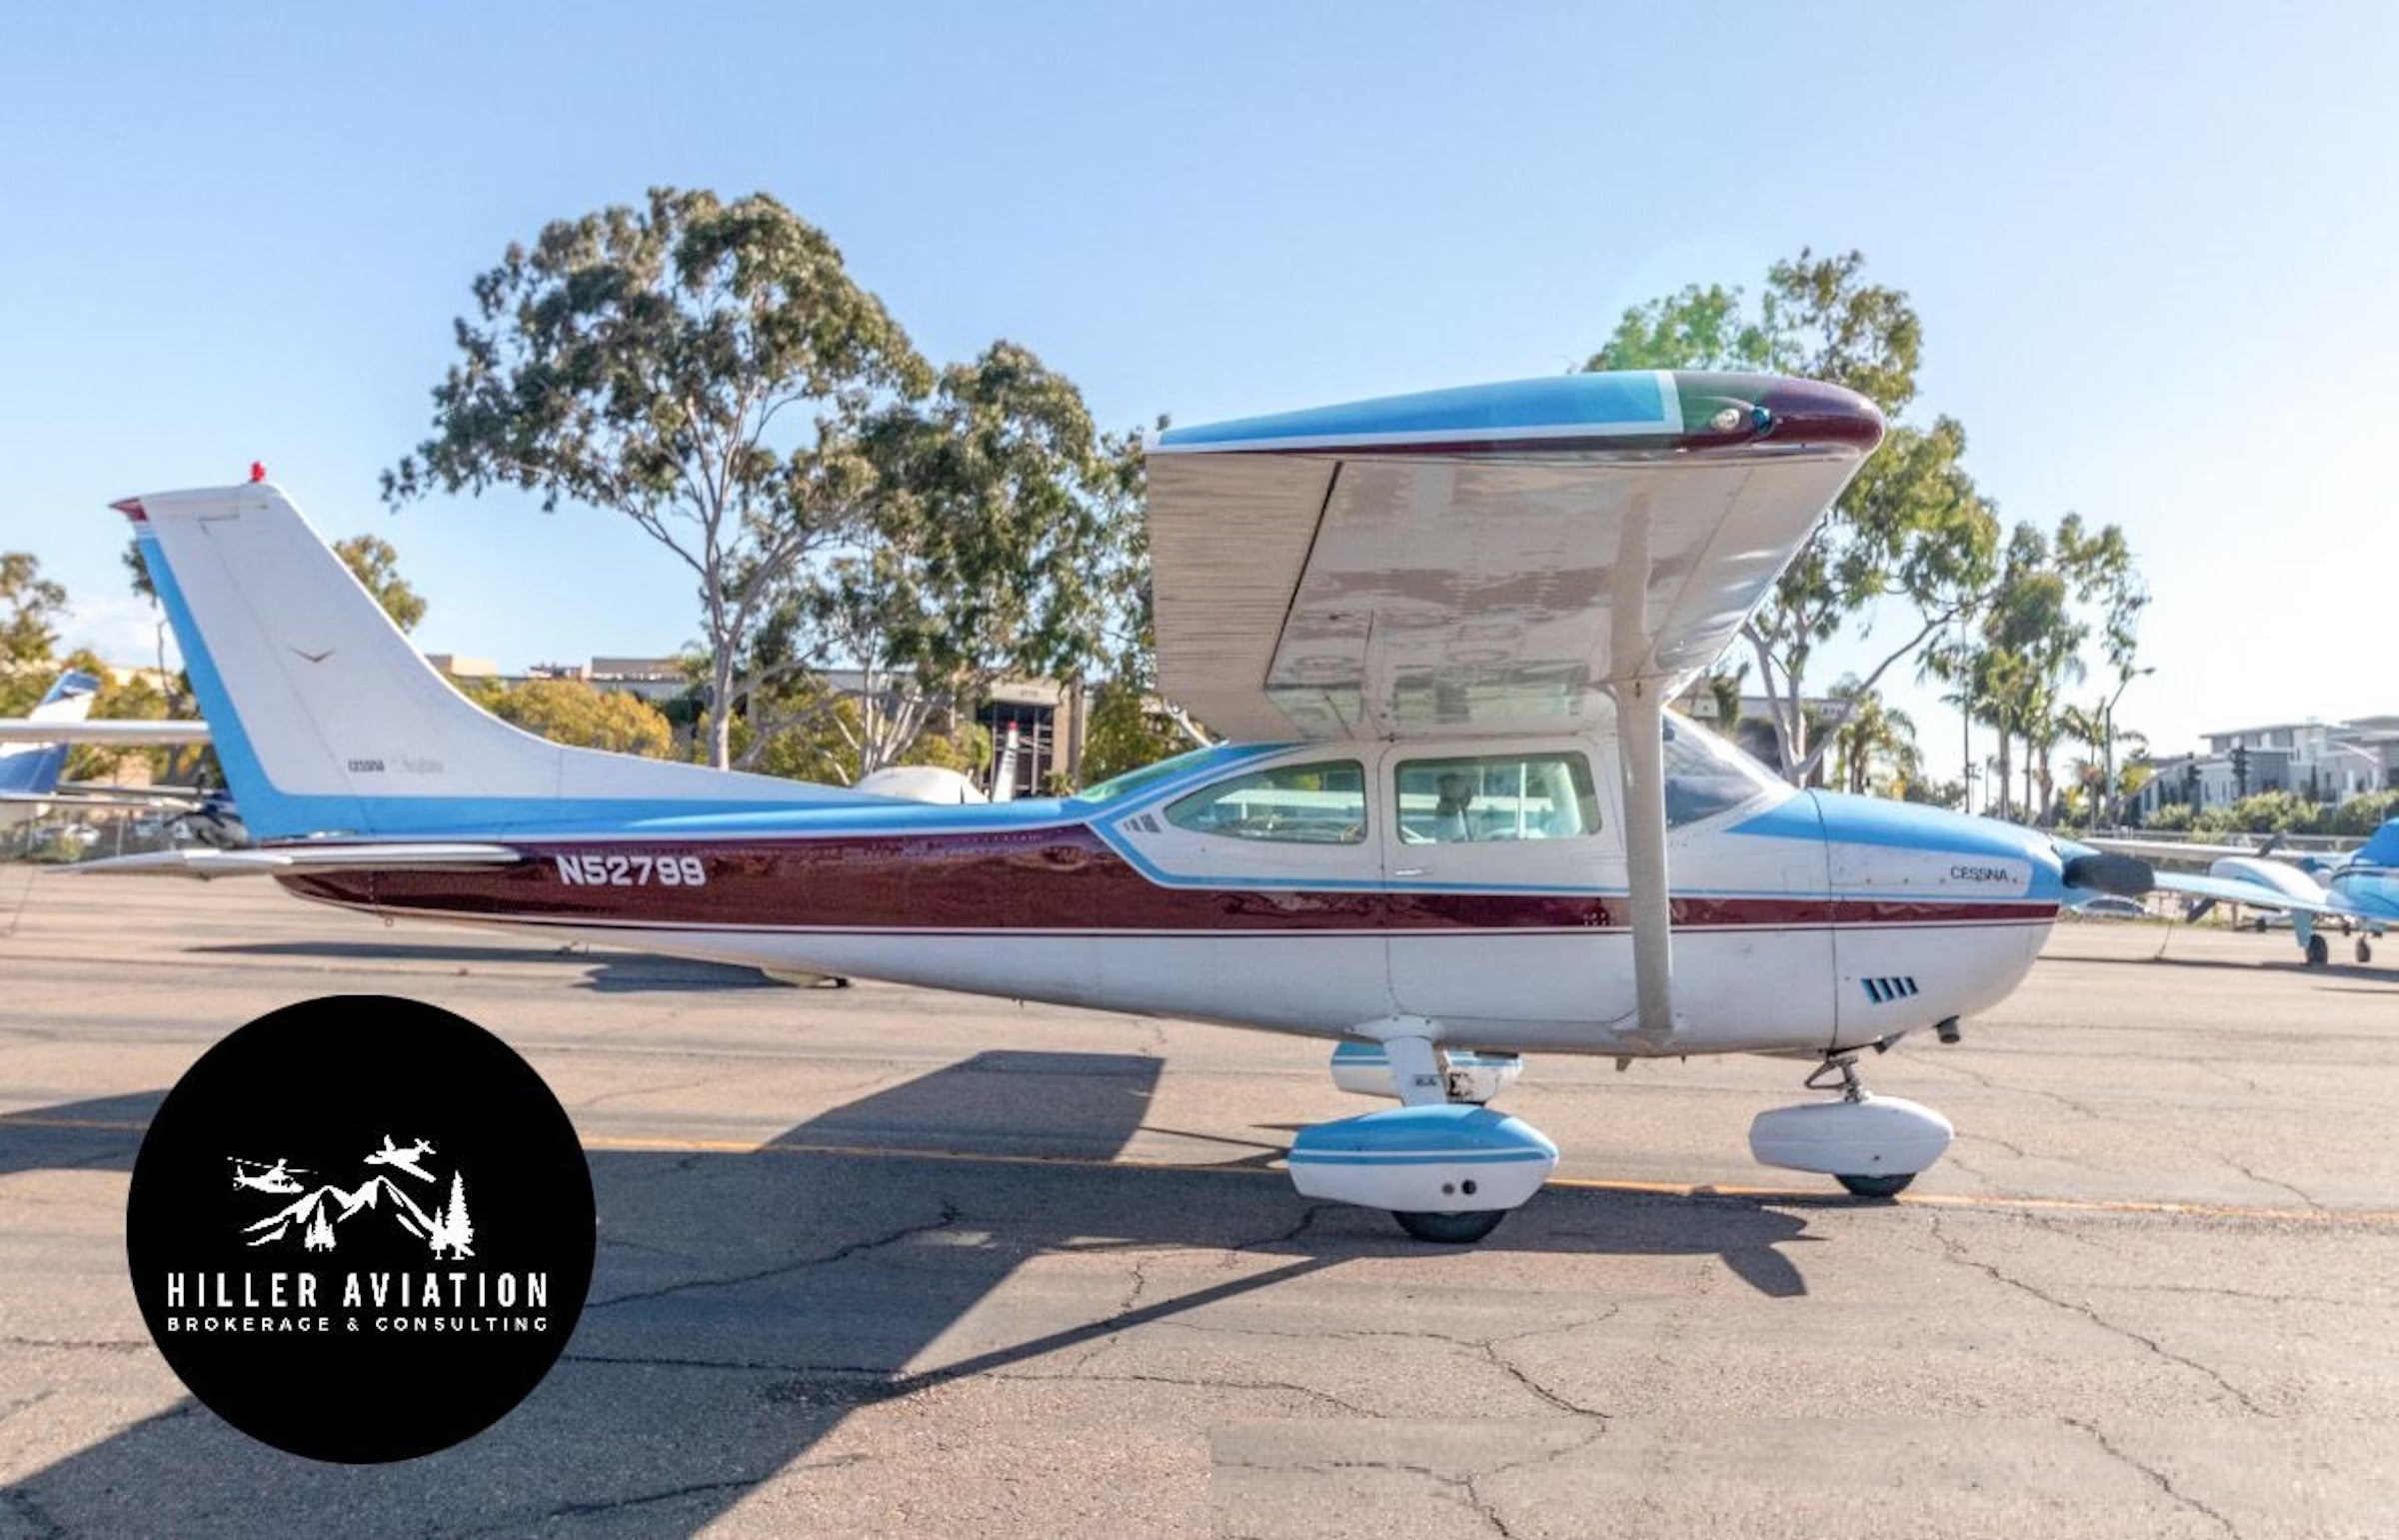 This 1974 Cessna 182P Skylane Is an All-Around ‘AircraftForSale’ Top Pick